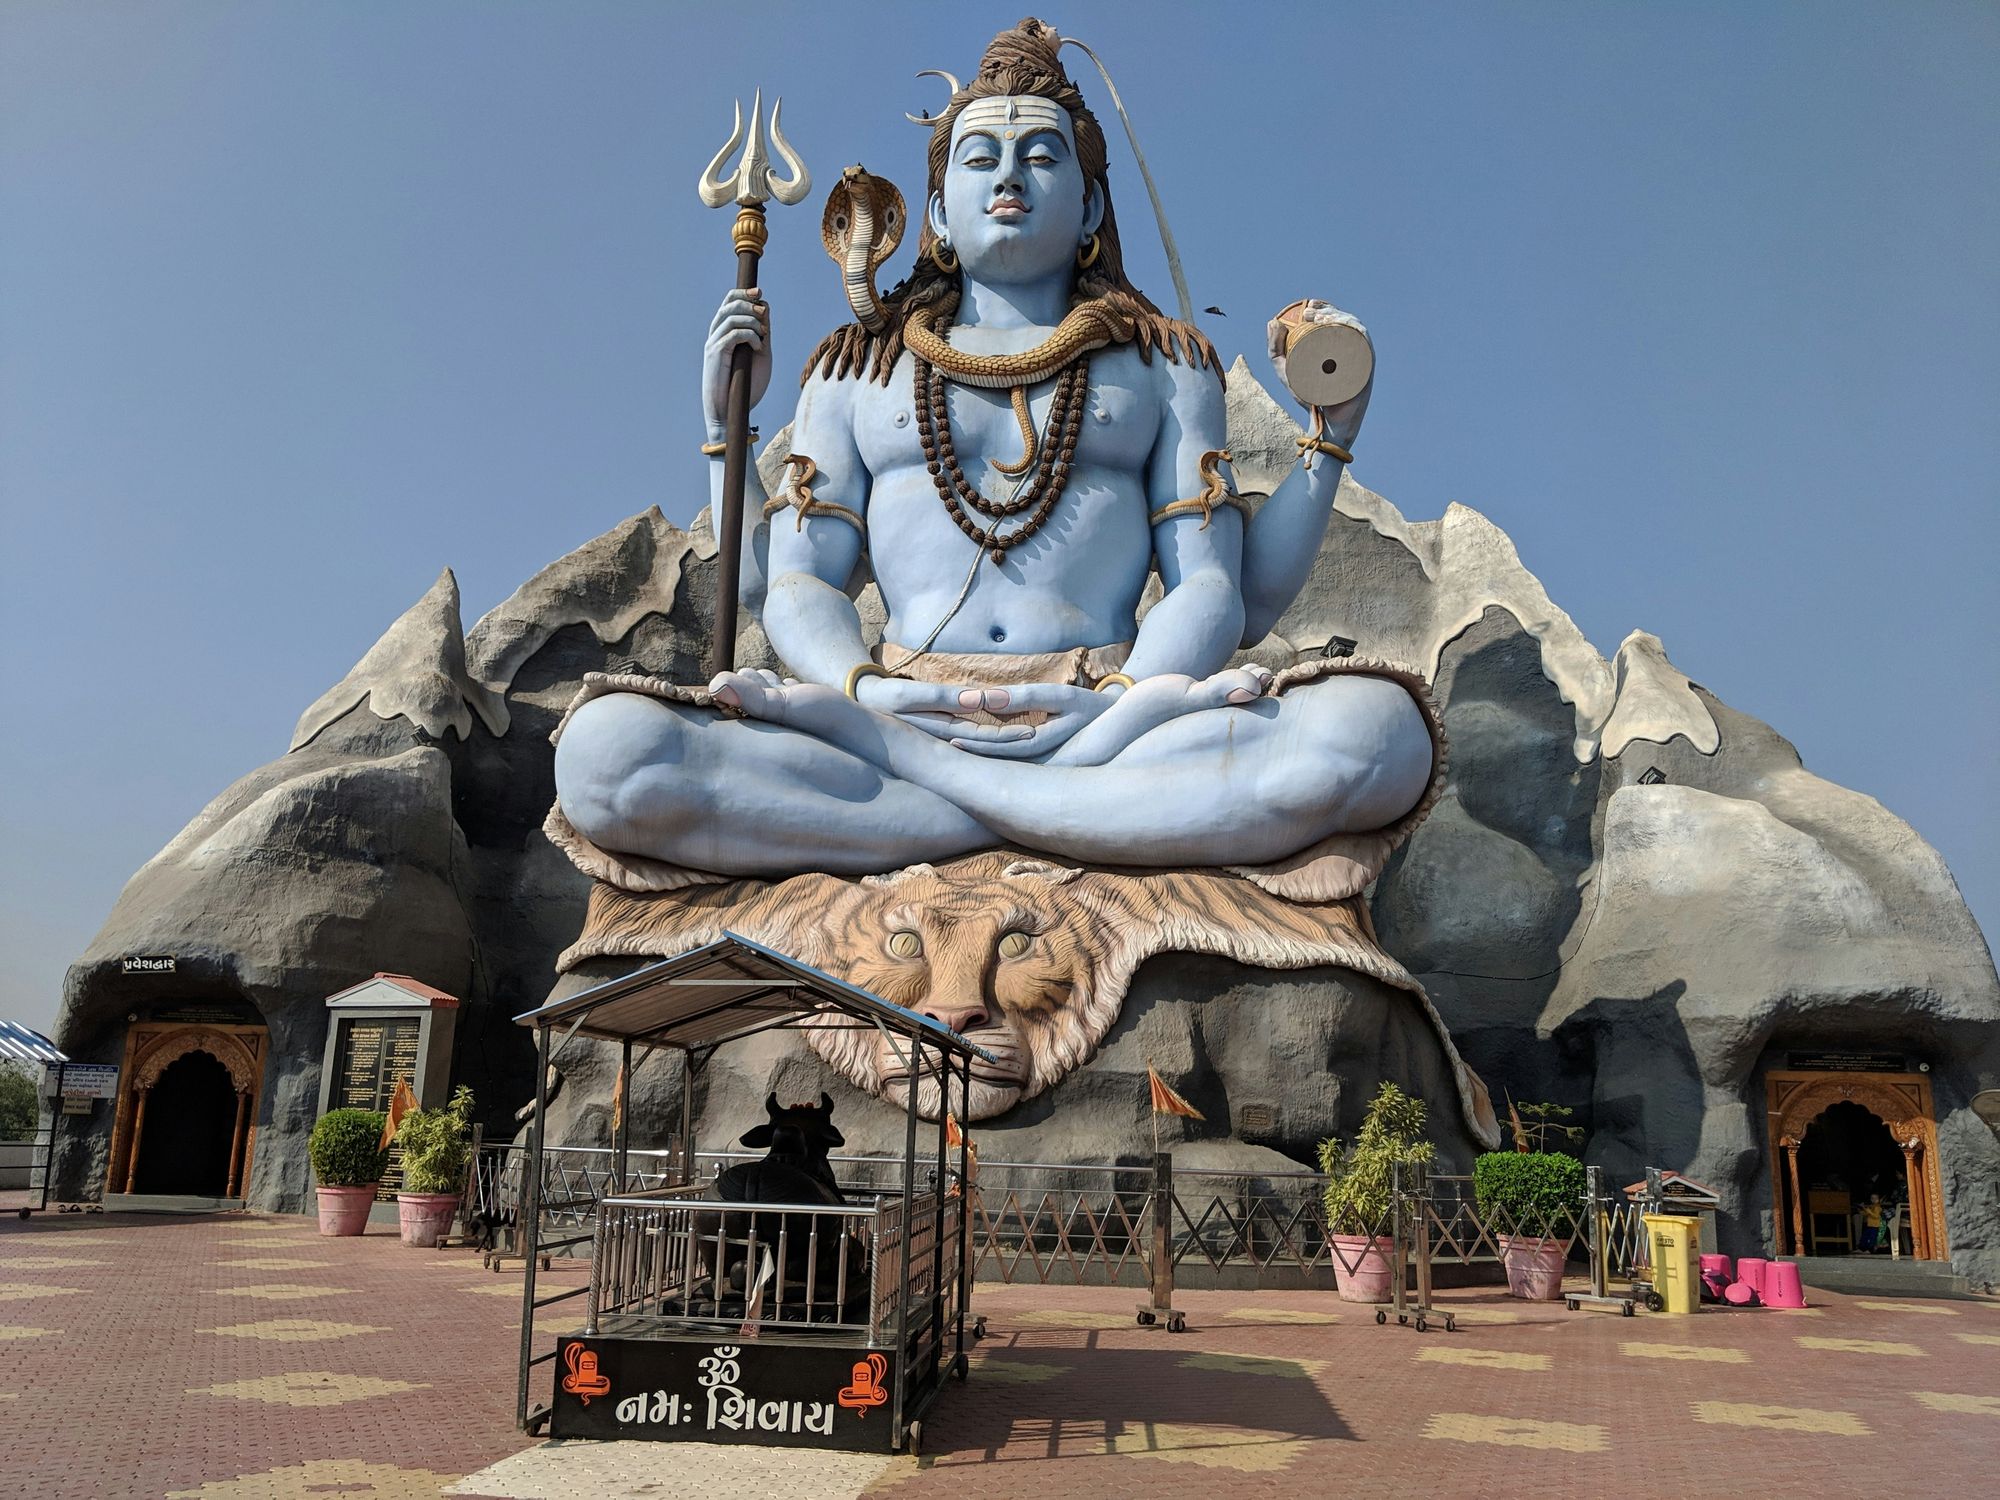 List of Most Famous & Powerful Lord Shiva Temples Across India